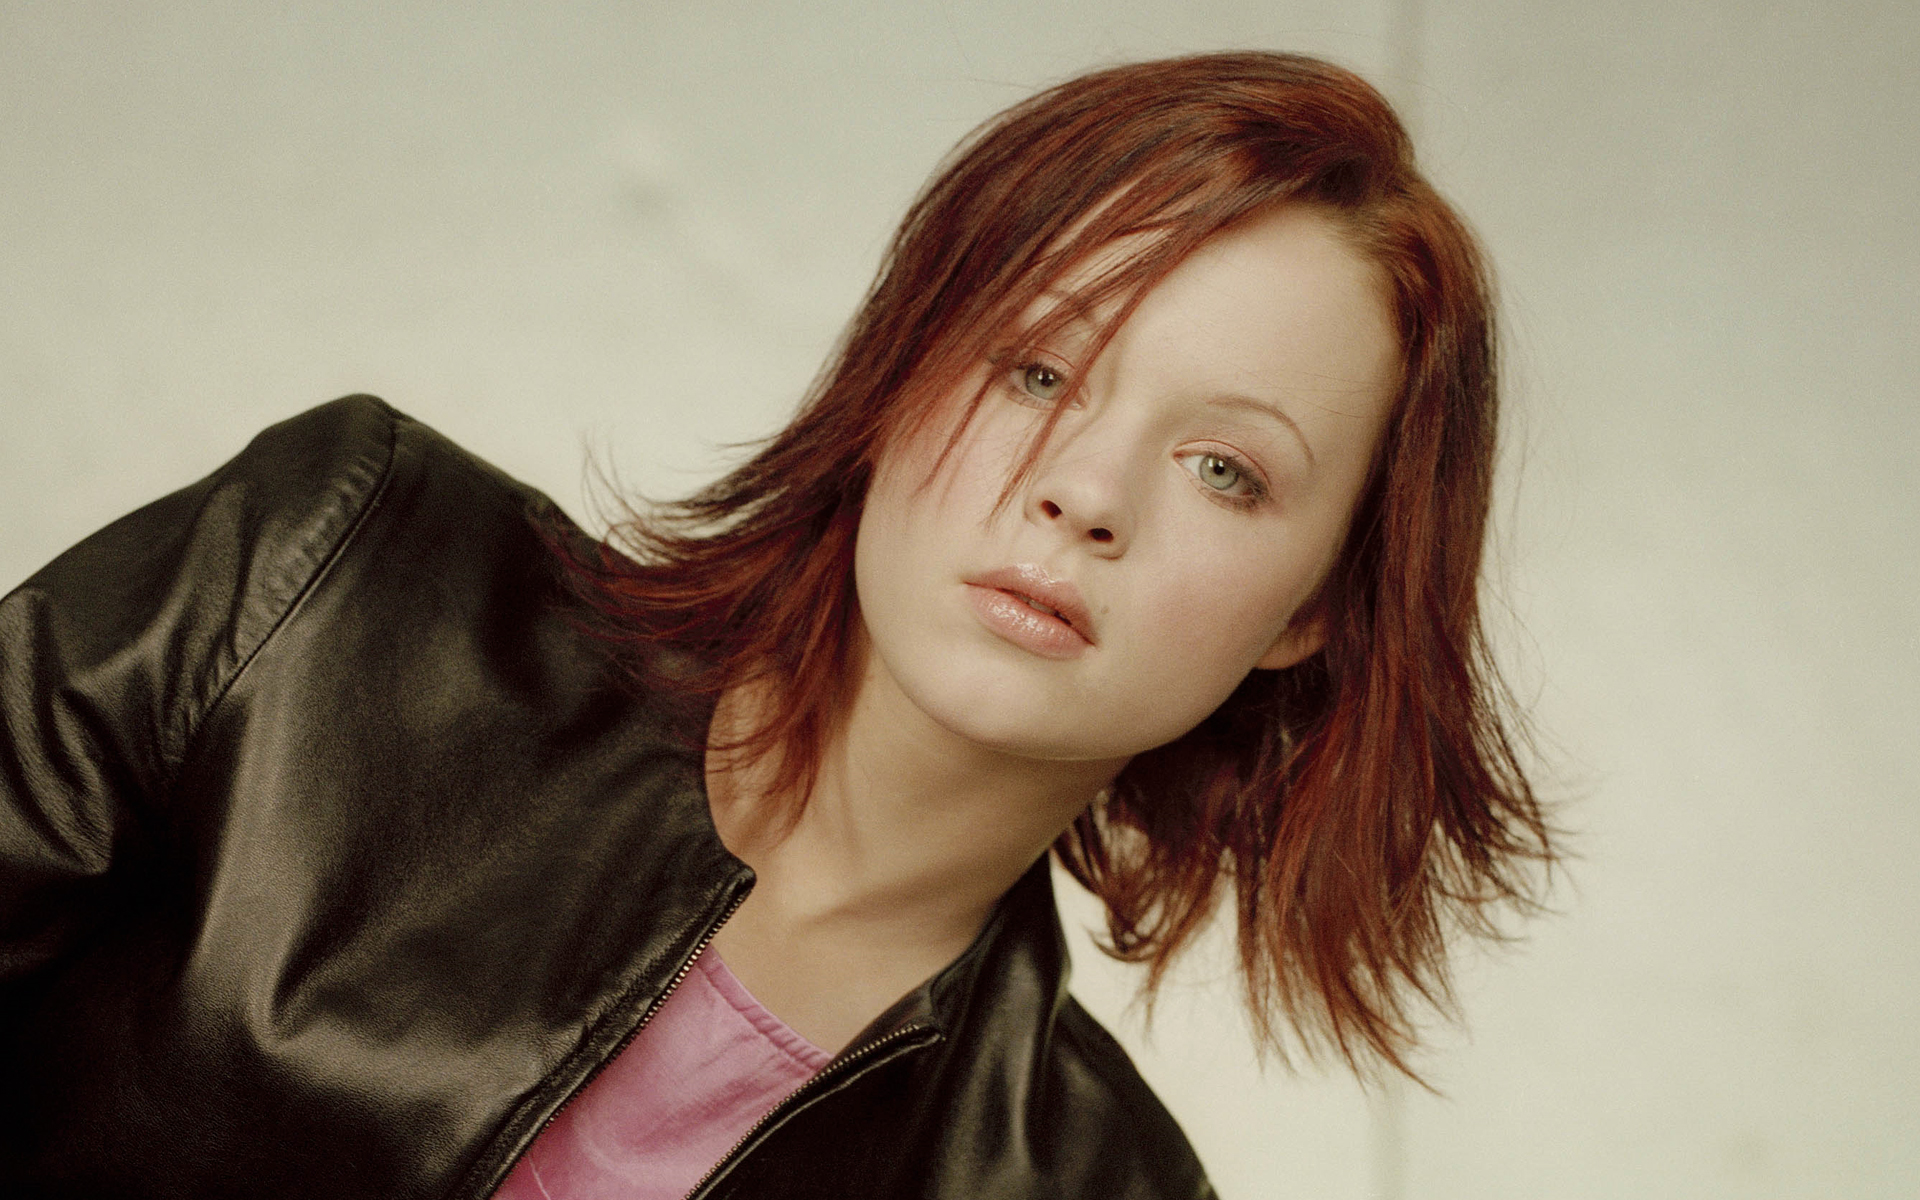 Thora Birch Wallpapers - Wallpaper Cave.